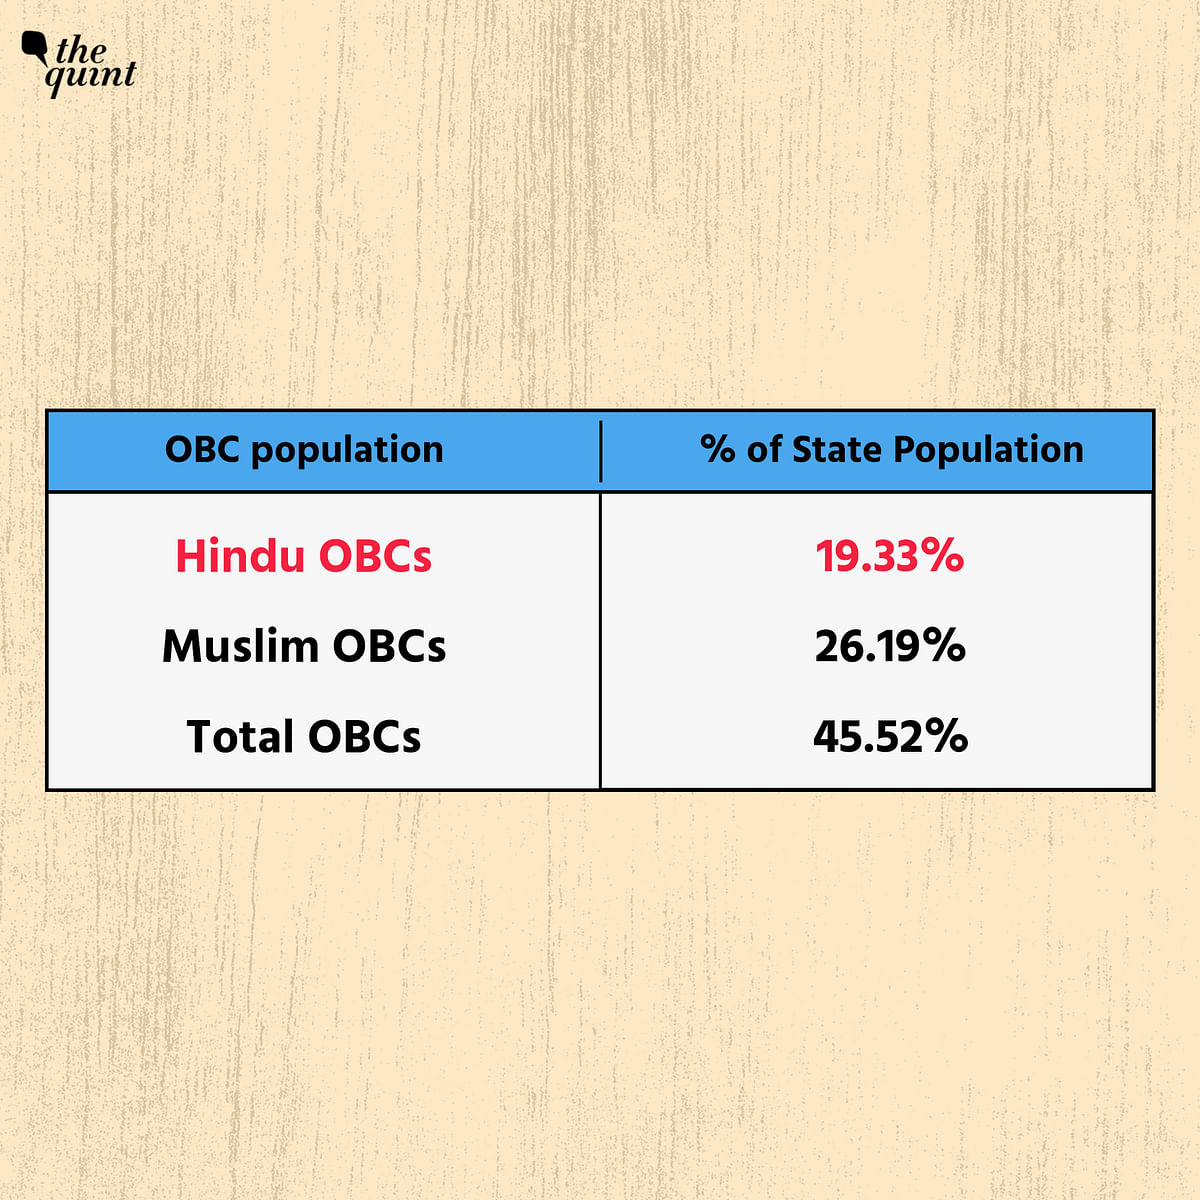 OBC politics changed forever in Bengal in 2010, post-announcement of 10% reservation for some Muslim communities.